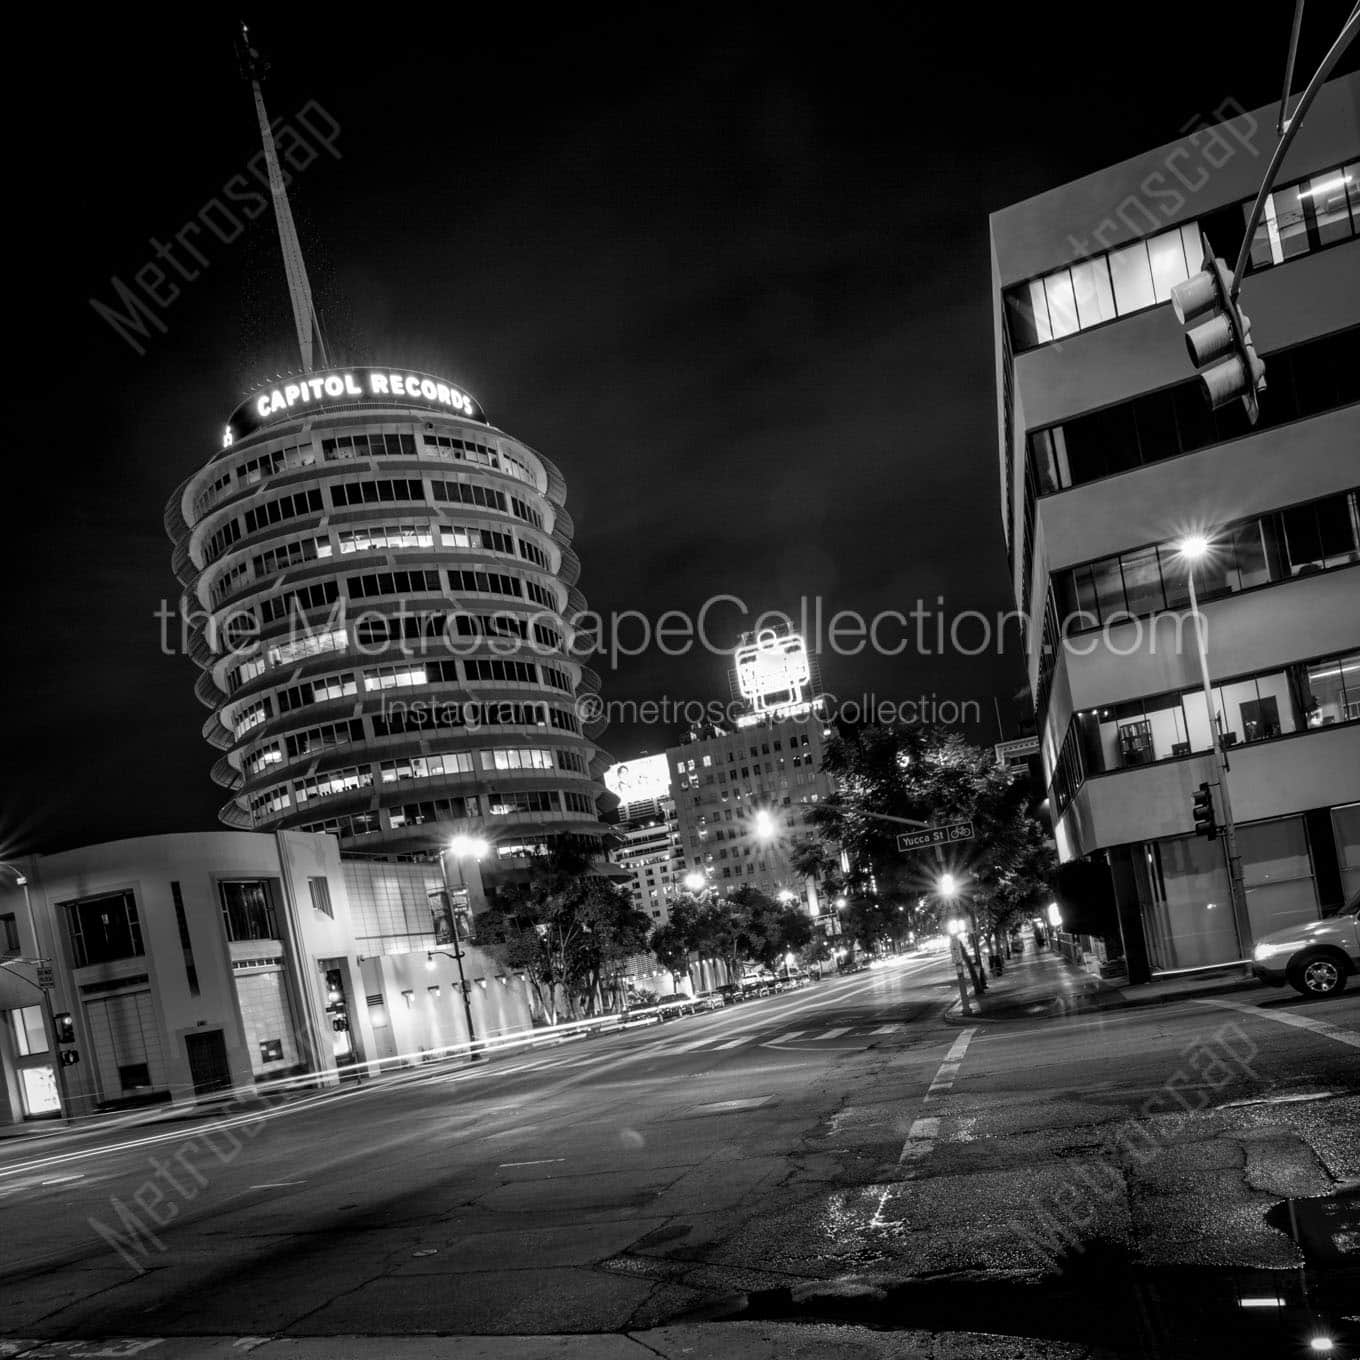 capitol records tower at night Black & White Wall Art